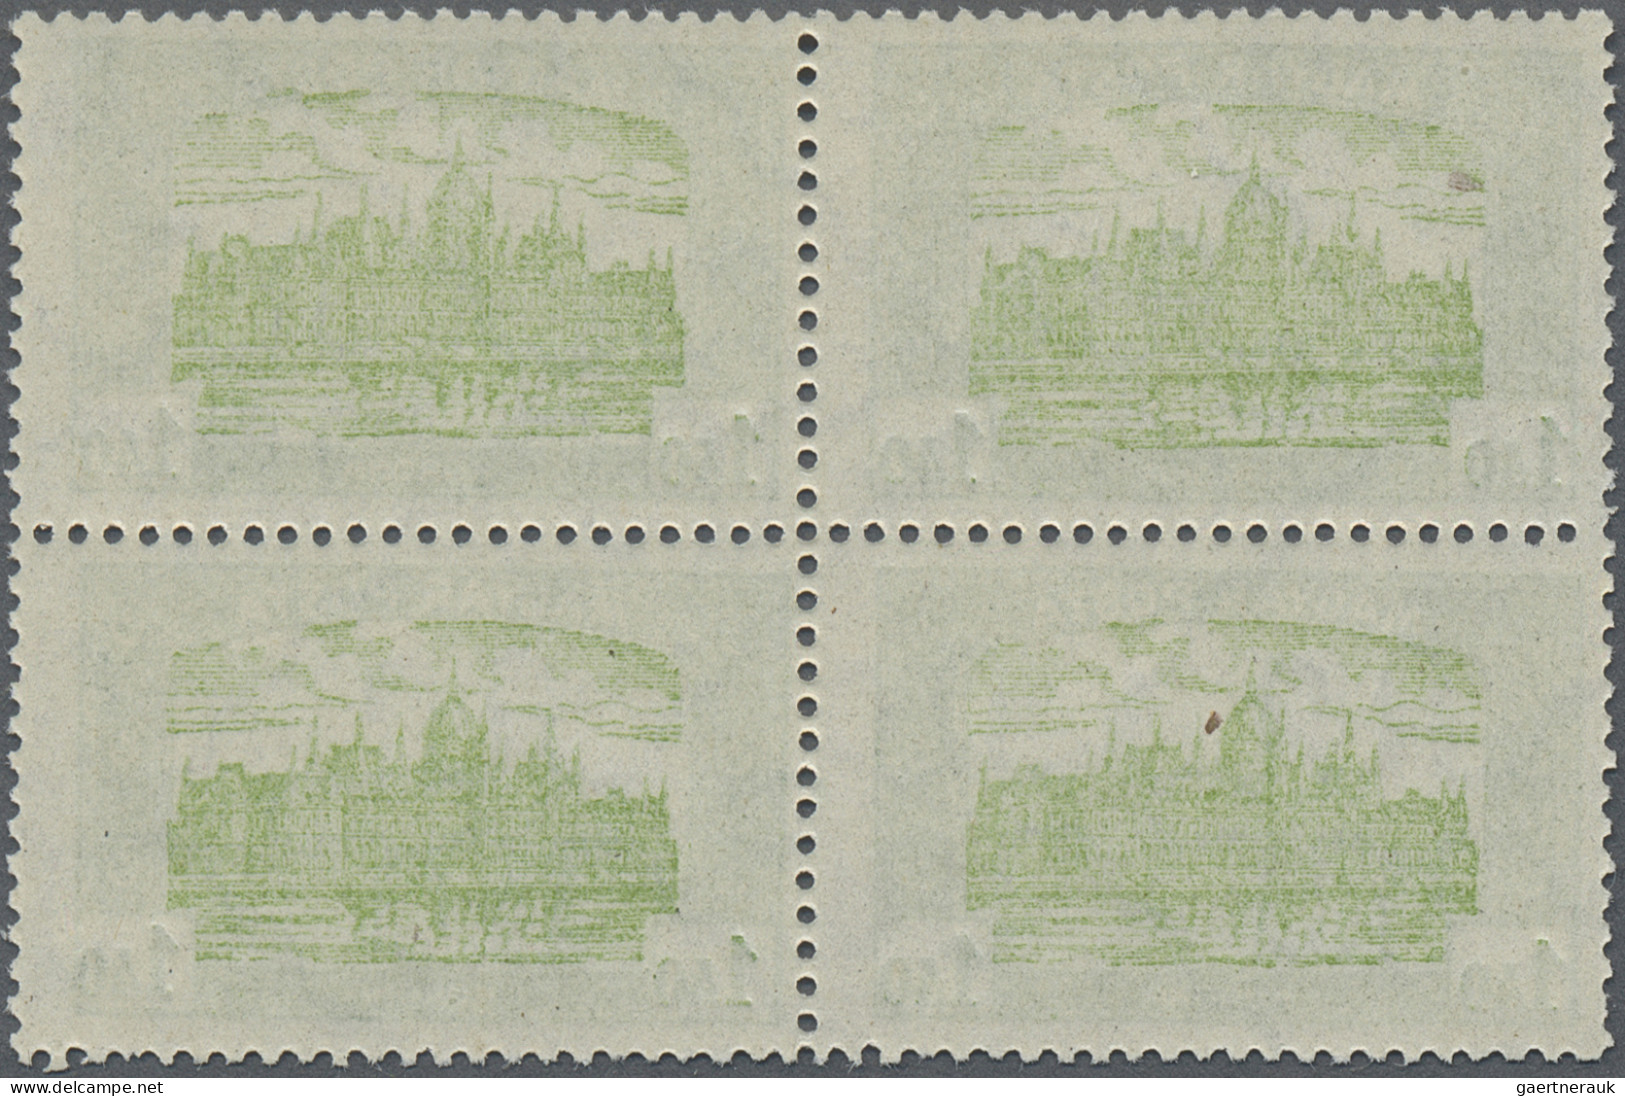 Hungary: 1919, Parliament Building Postage Stamps, 1.40 Kr In Mint Block Of Four - Neufs